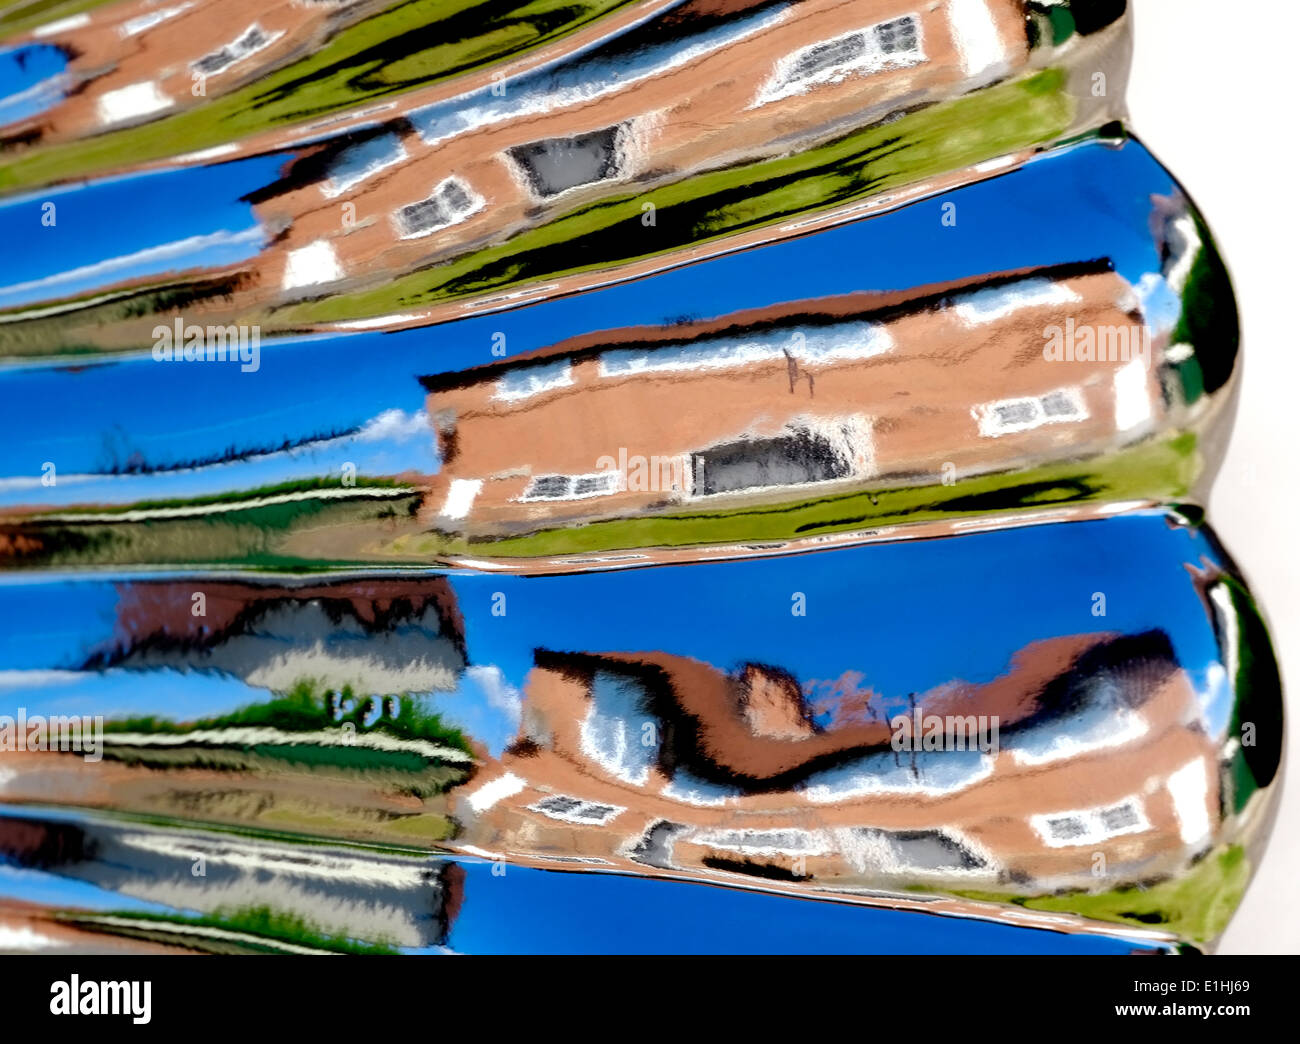 A warped image of a house and garden England uk. Reflection from a garden ornament Stock Photo